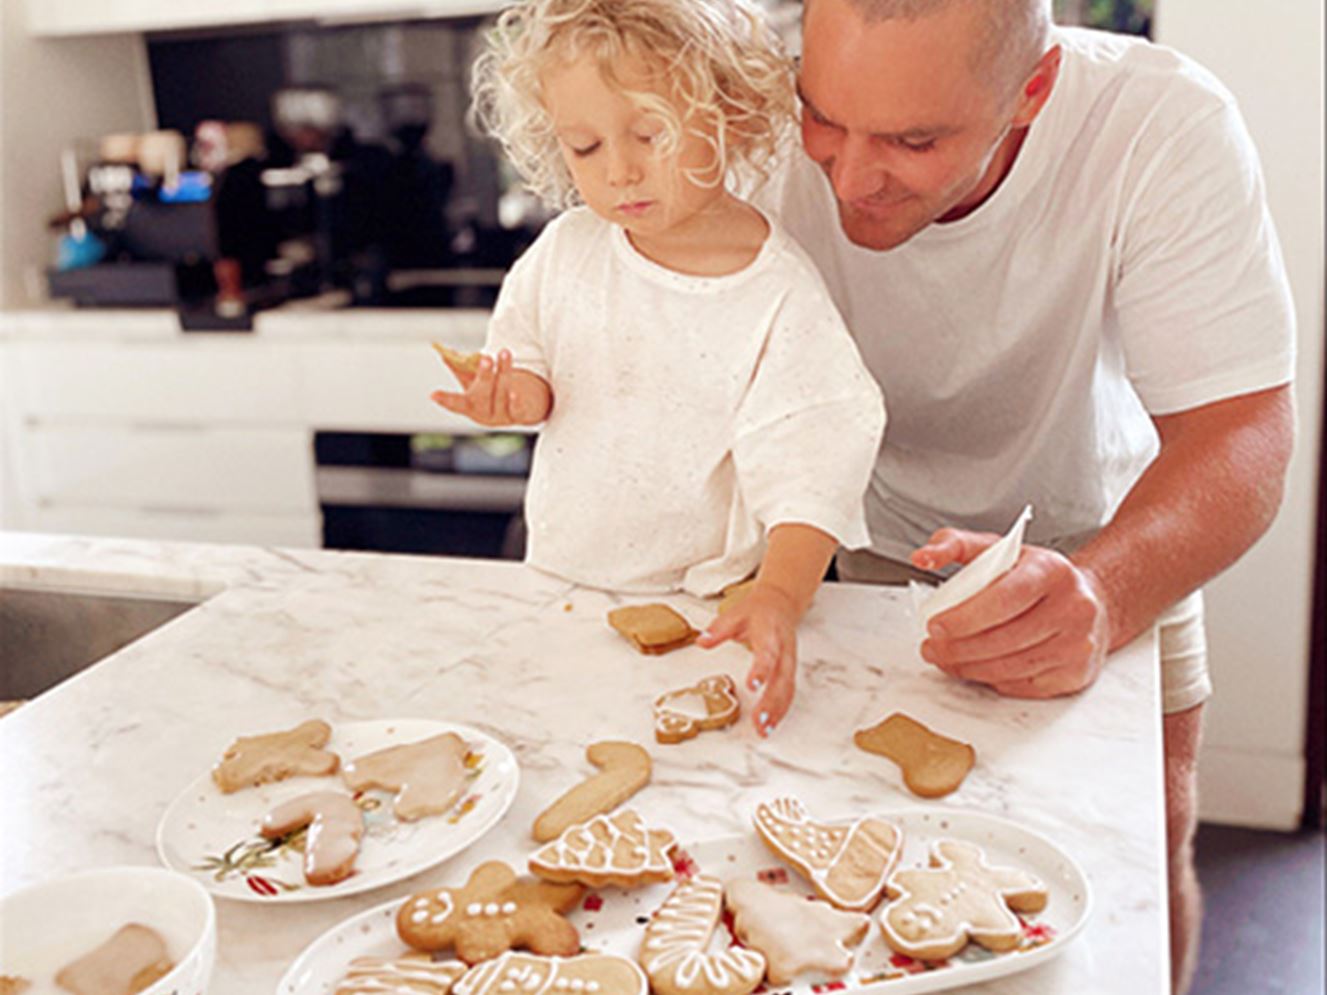 Father and toddler standing at a bench decorating Christmas gingerbread cookies.